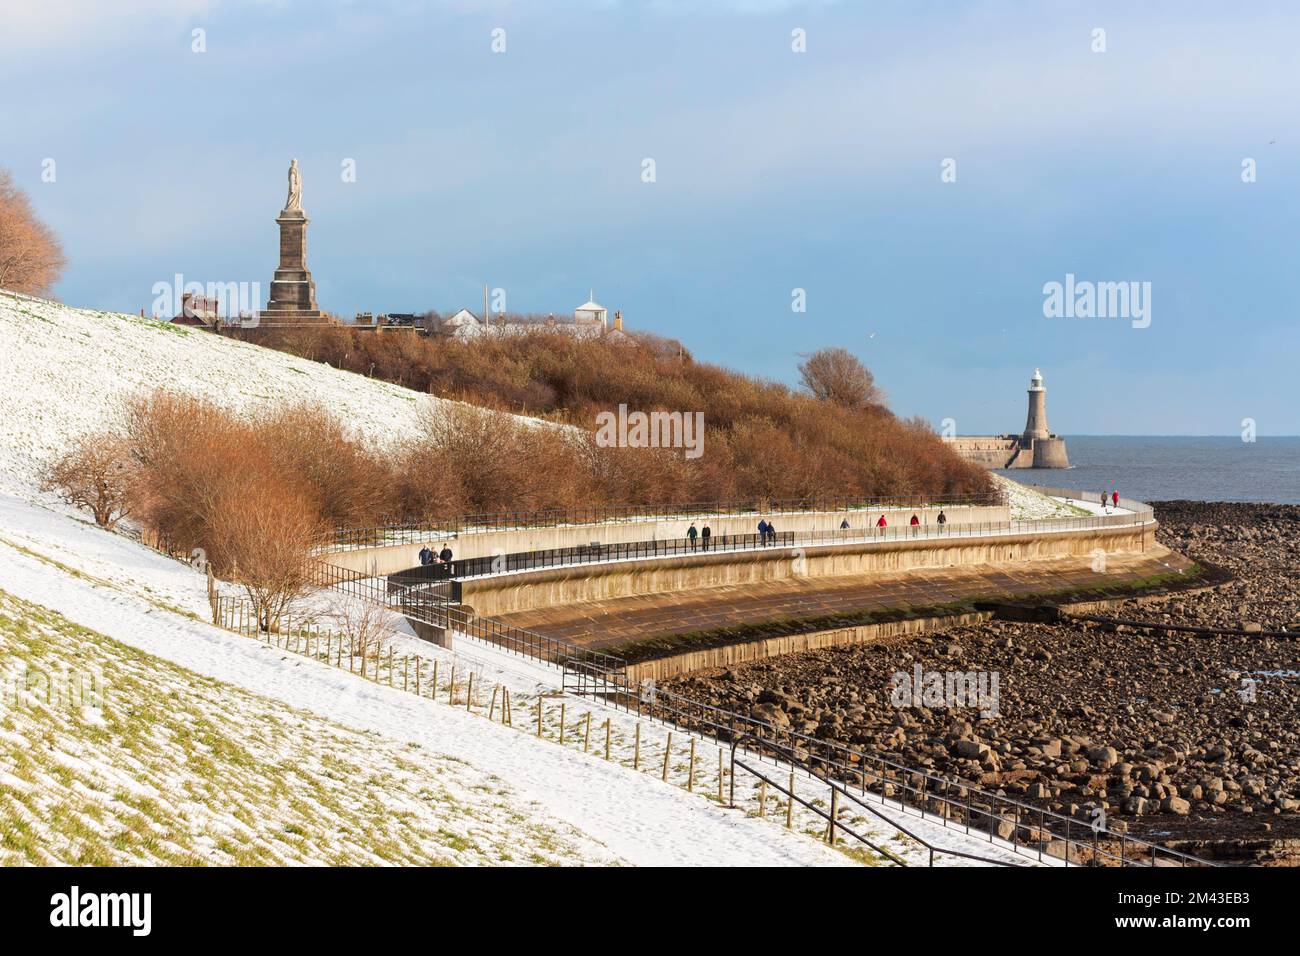 Tynemouth riverside and pier in the winter, England, UK Stock Photo